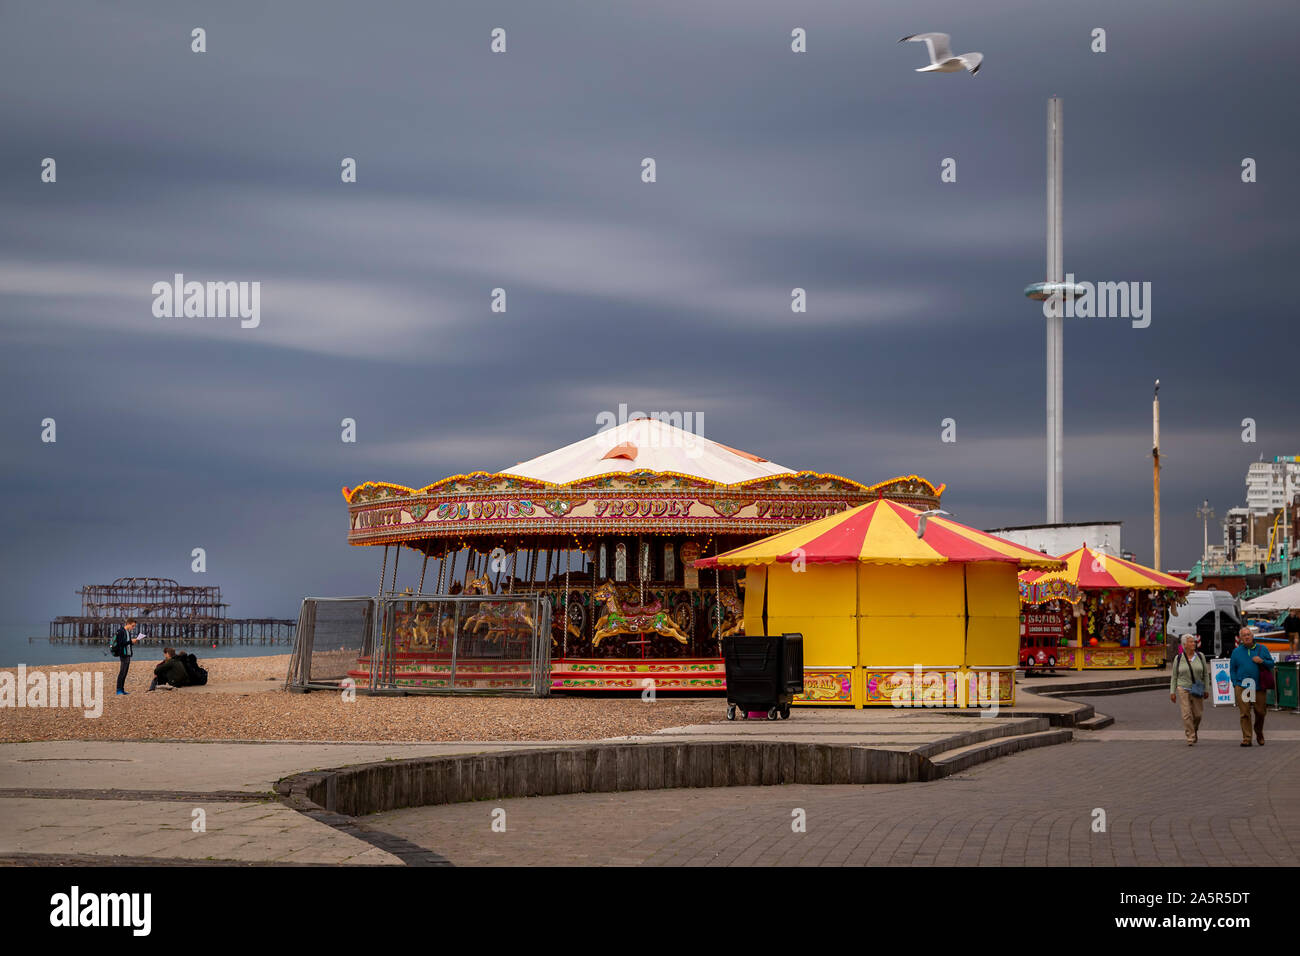 brighton seafront attractions Stock Photo